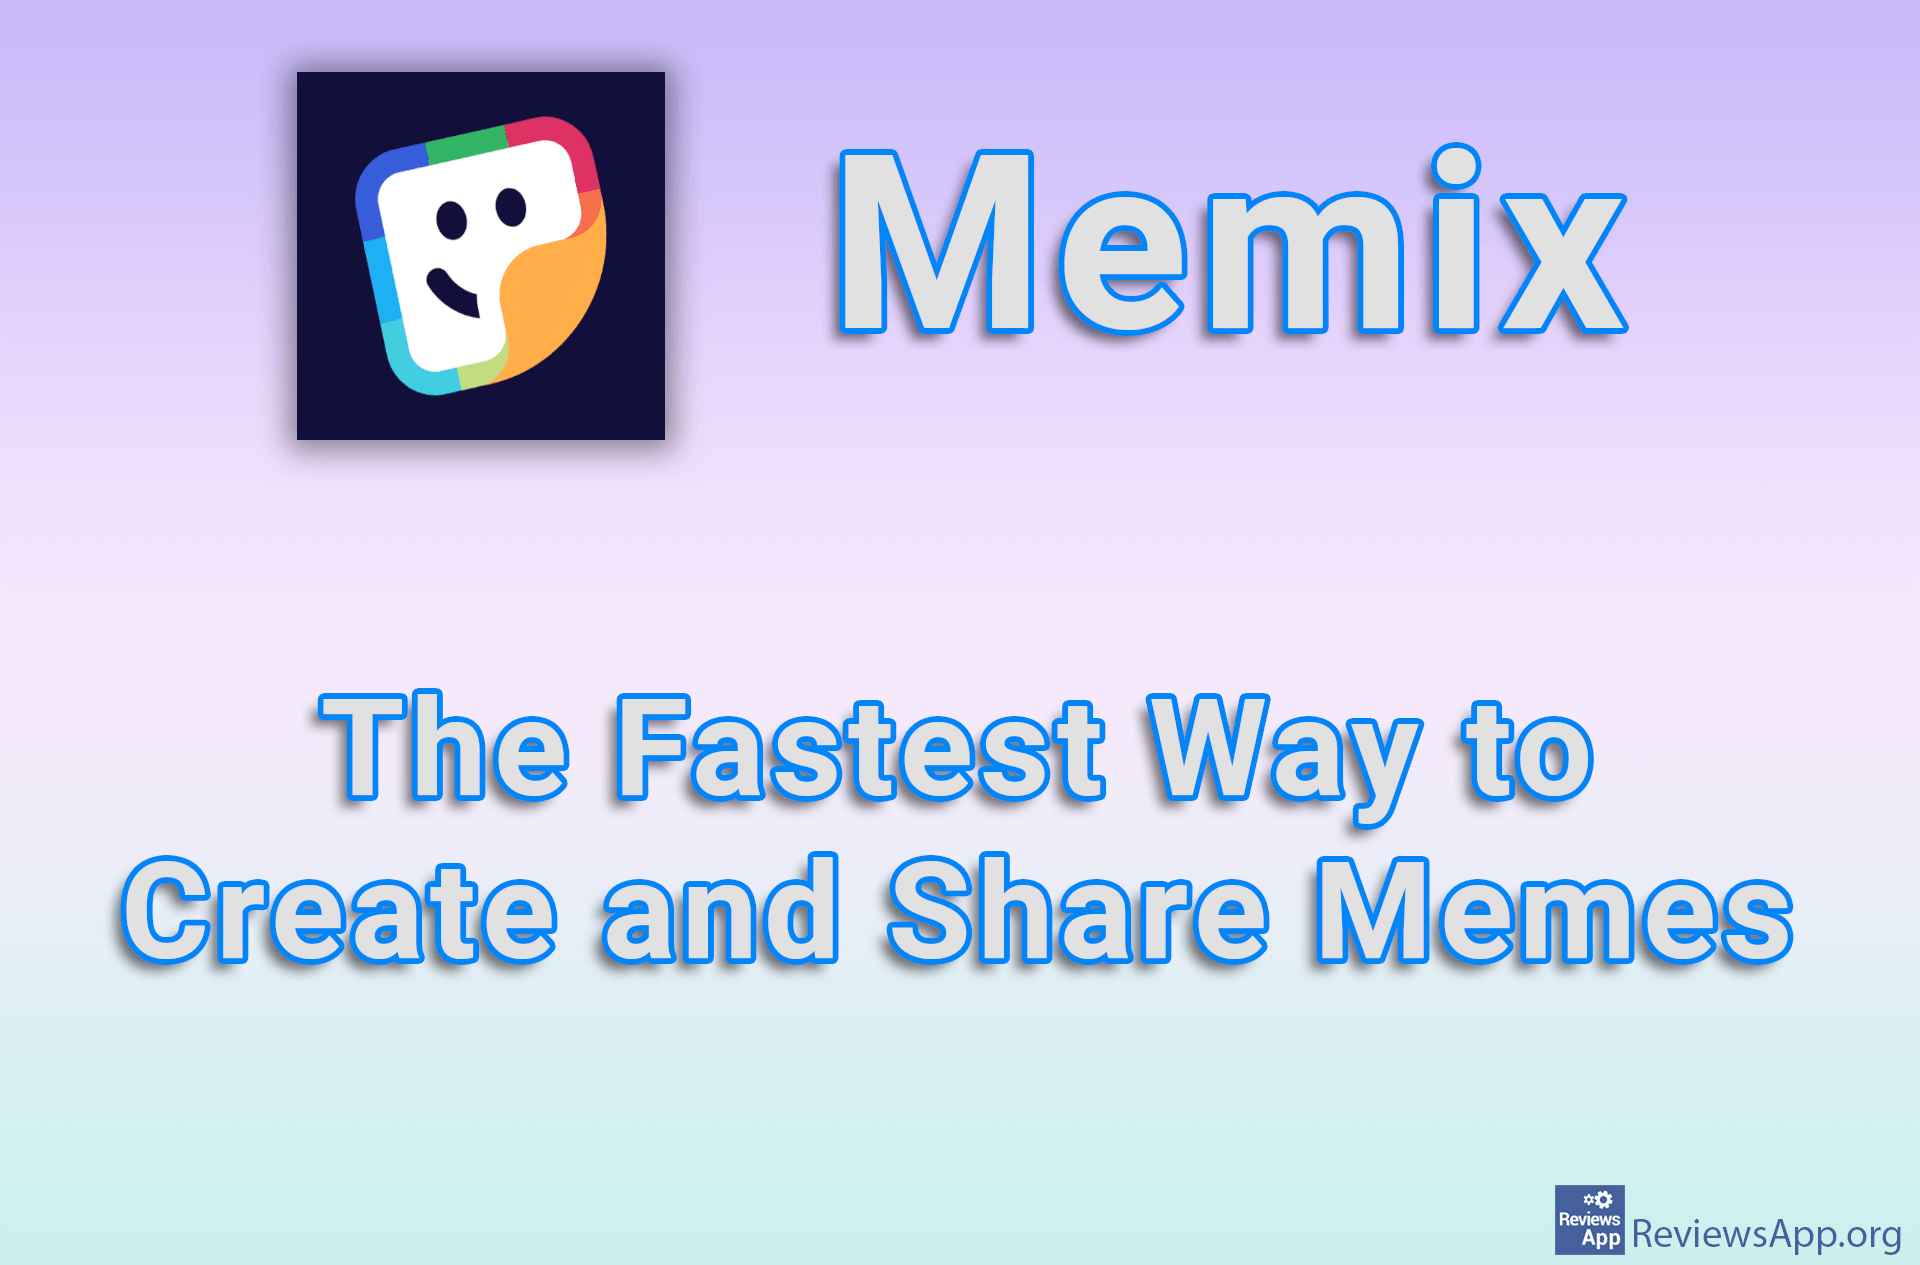 Memix – The Fastest Way to Create and Share Memes